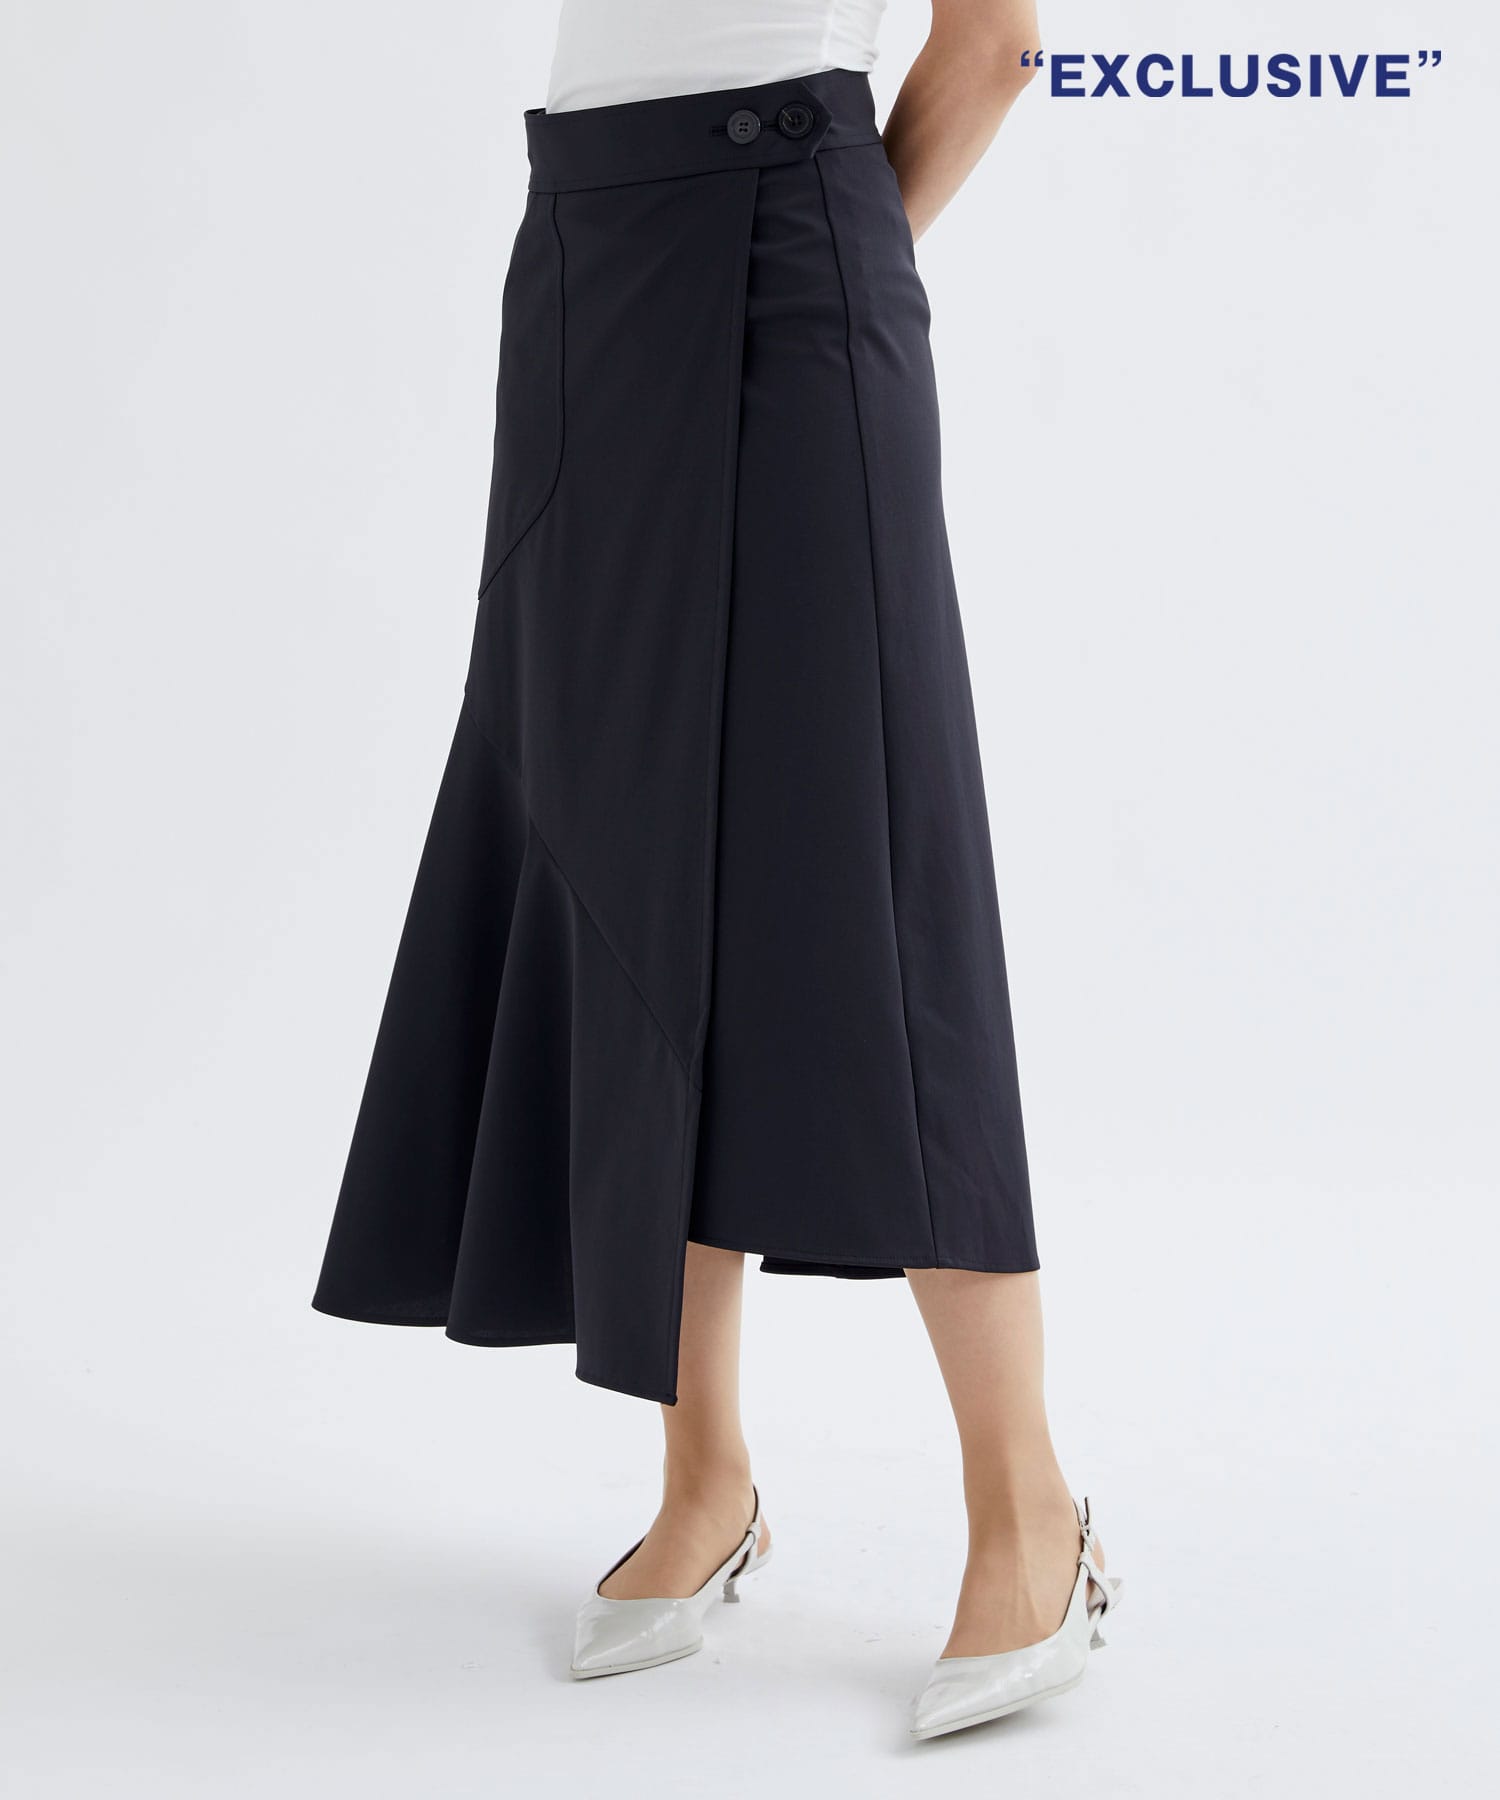 WASHABLE HIGH FANCTION JERSEY WRAP SKIRT